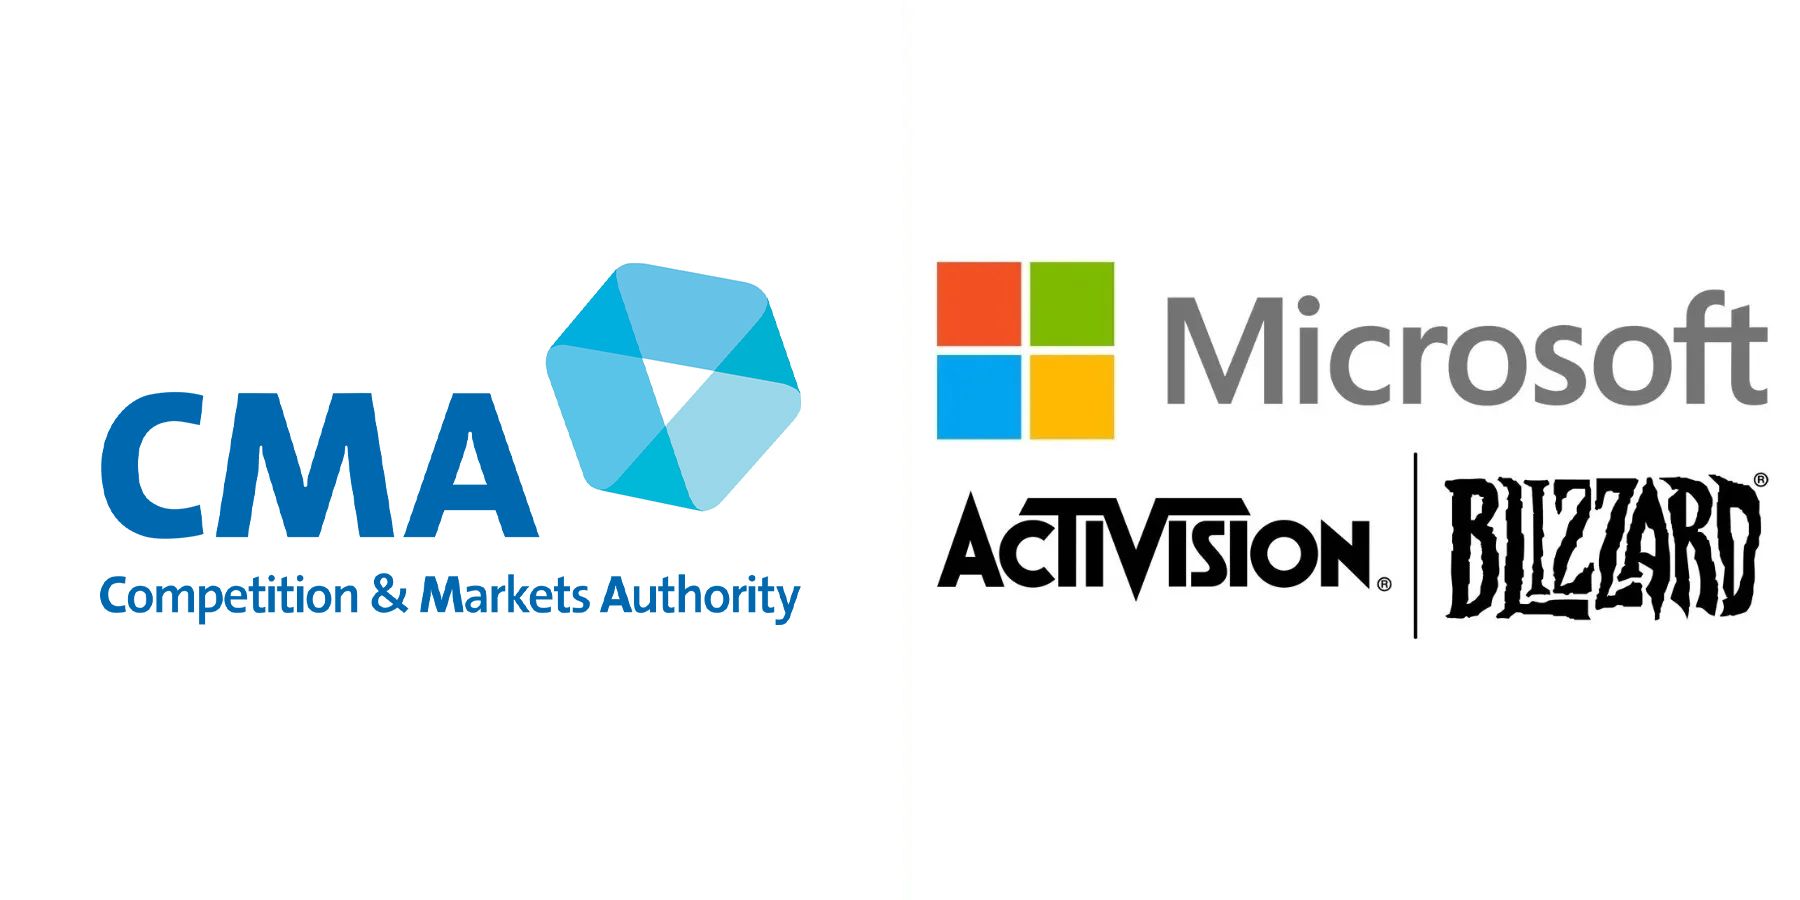 UK CMA Competition and Markets Authority and Microsoft Activision Blizzard logos